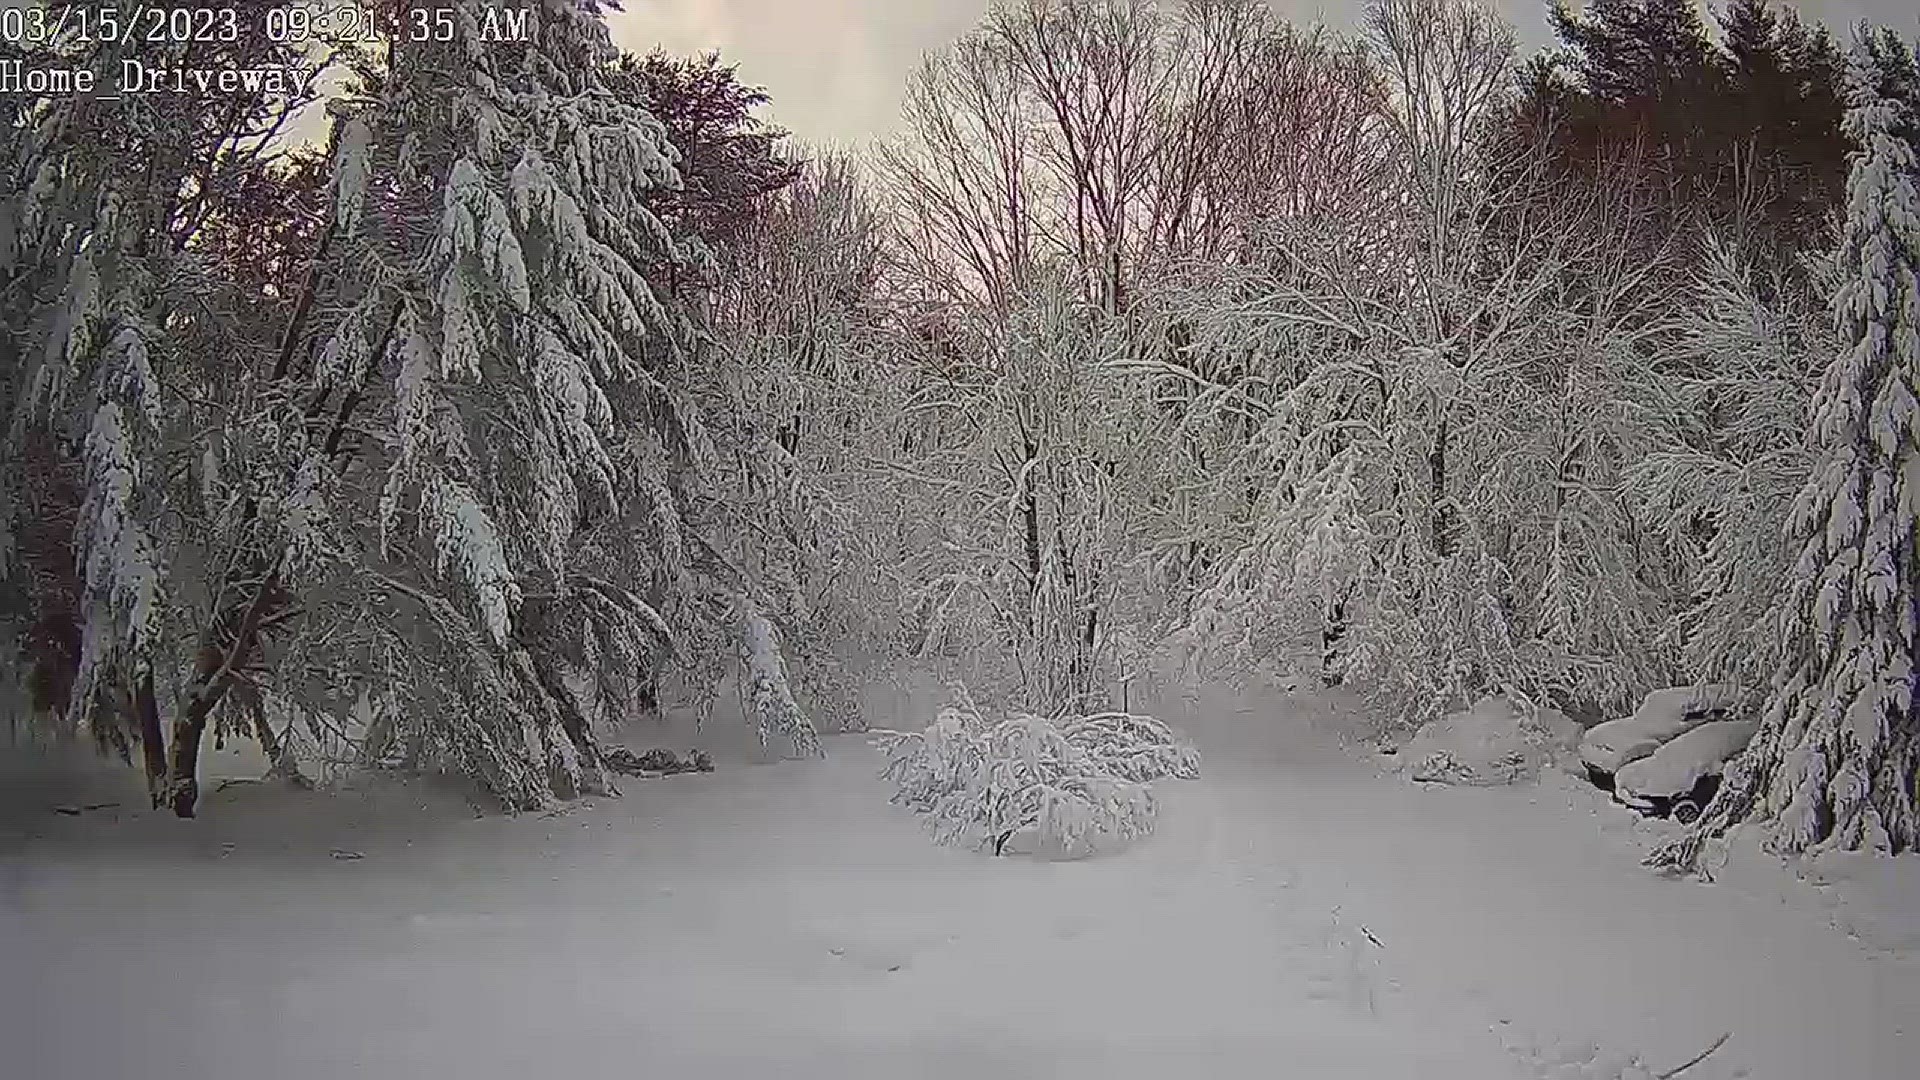 My security camera caught a tree in my front yard collapsing under the snow. About 12"
Credit: Rebecca Waddell